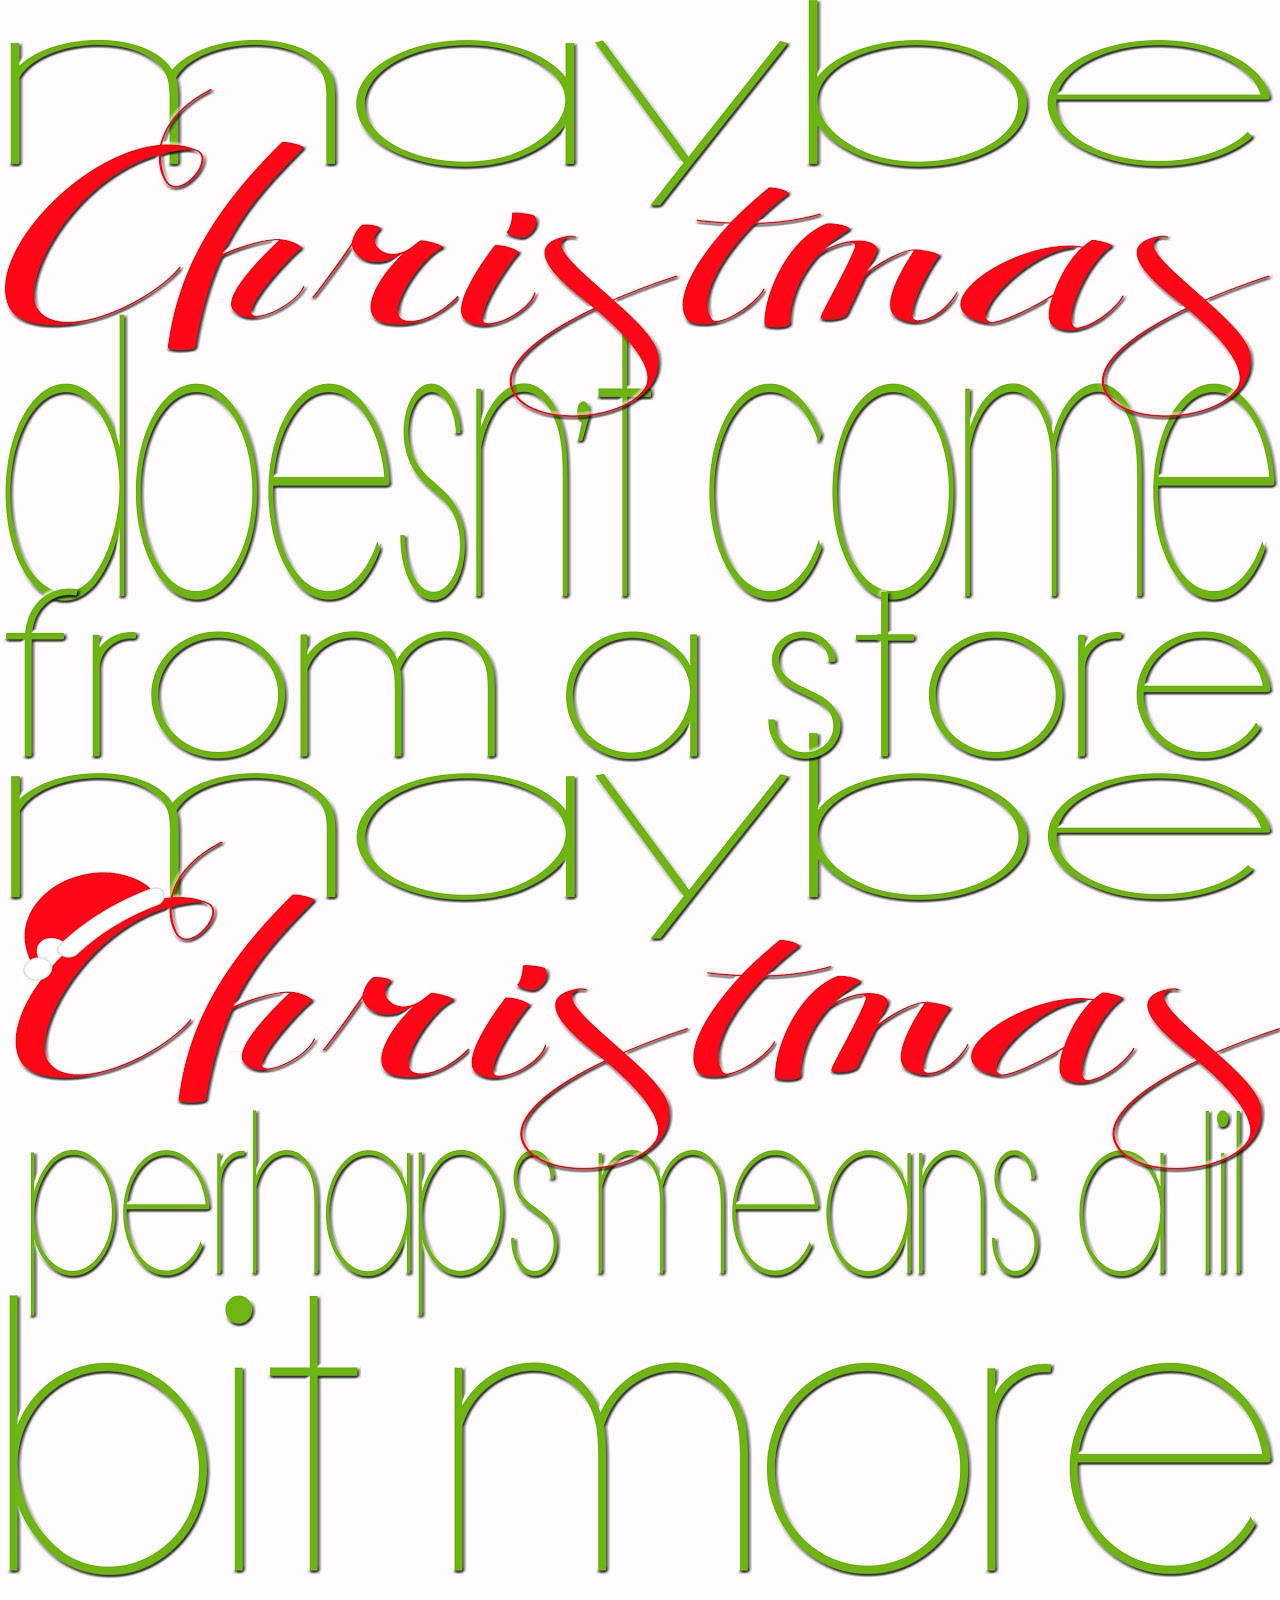 sweet-christmas-sayings-and-quotes-quotesgram